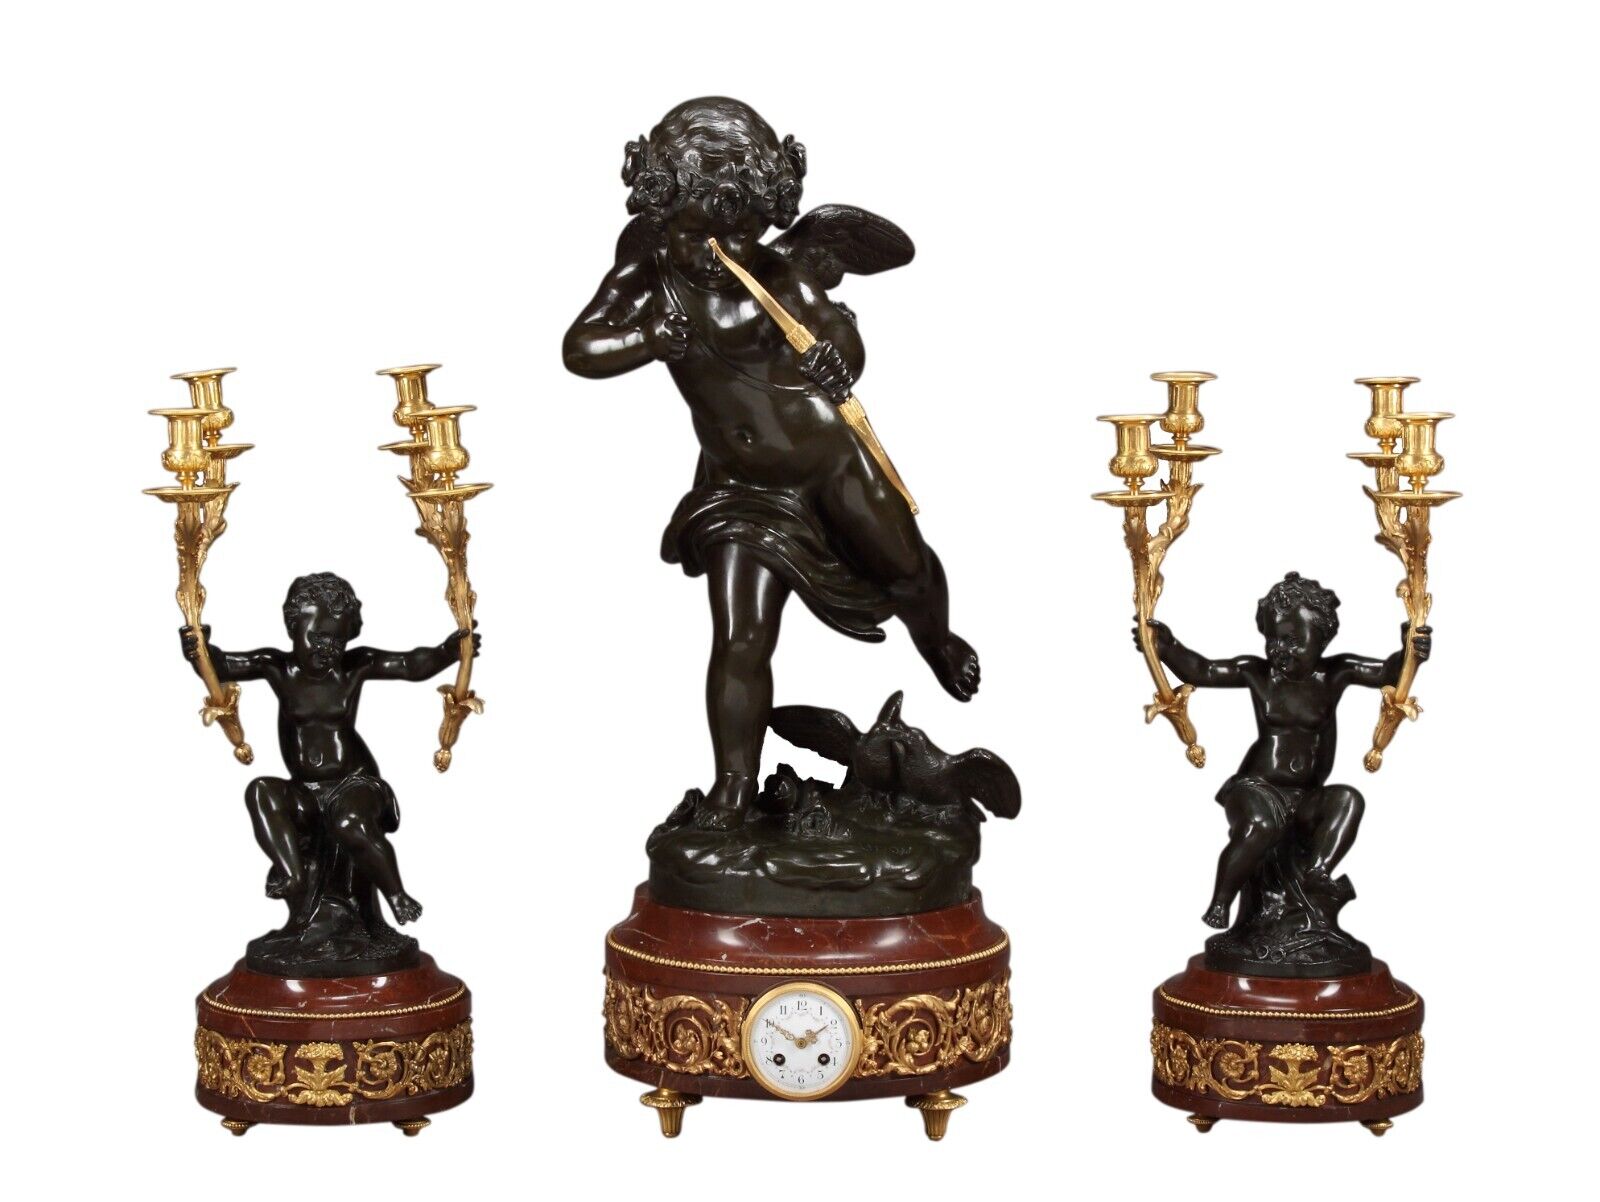 LARGE FRENCH PATINATED BRONZE FIGURAL CLOCK GARNITURE AFTER JEAN ANTOINE HOUDON